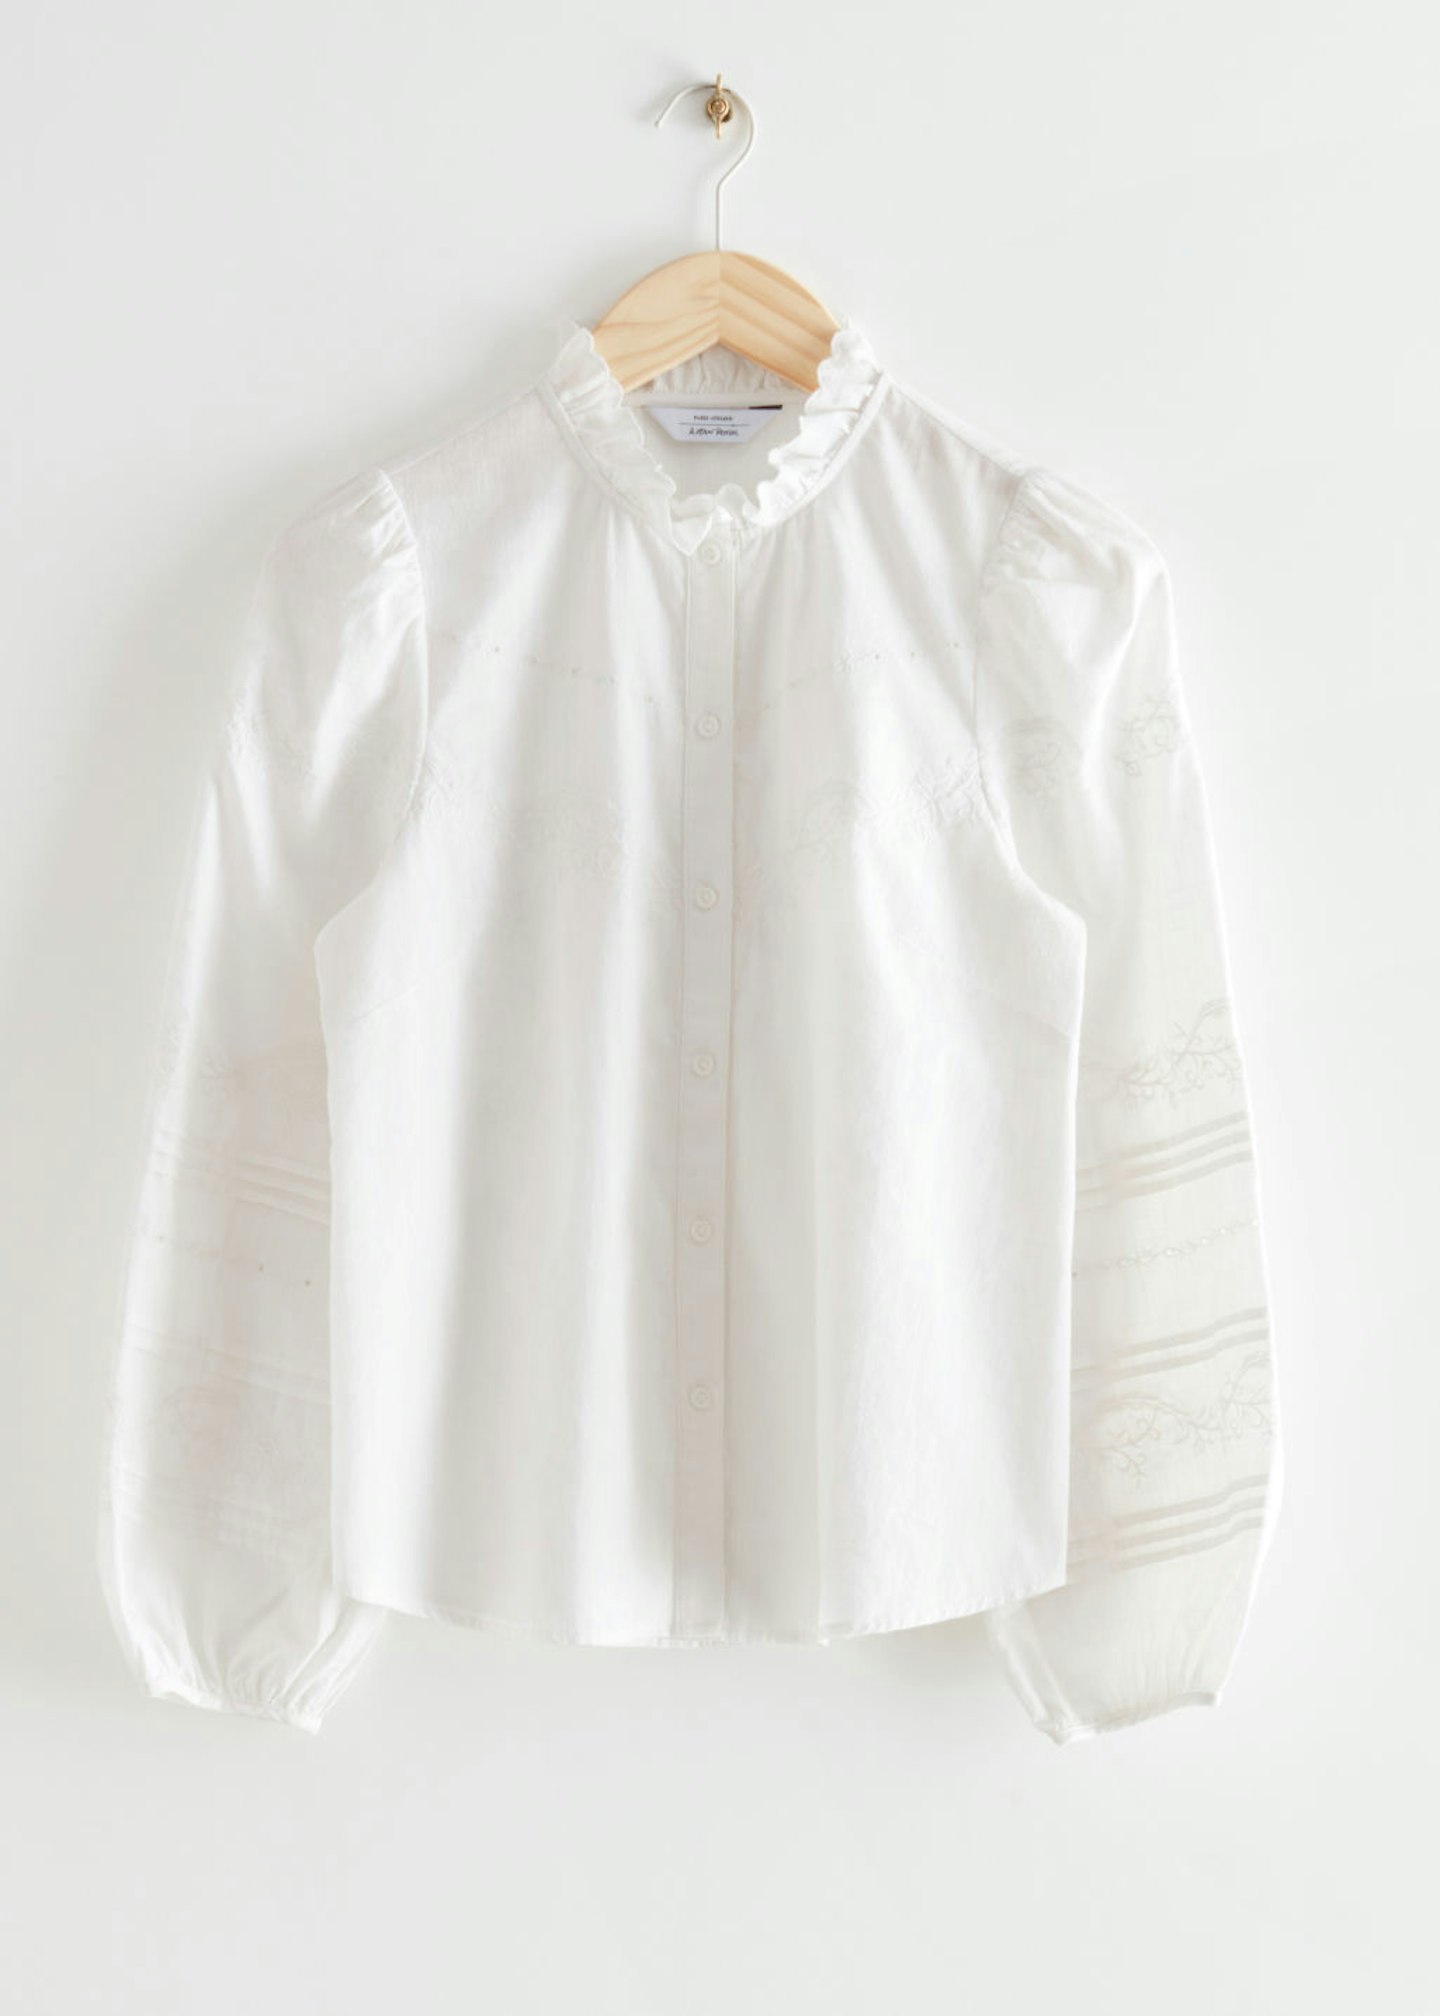 & Other Stories, Embroidered Puff-Sleeve Blouse, £65